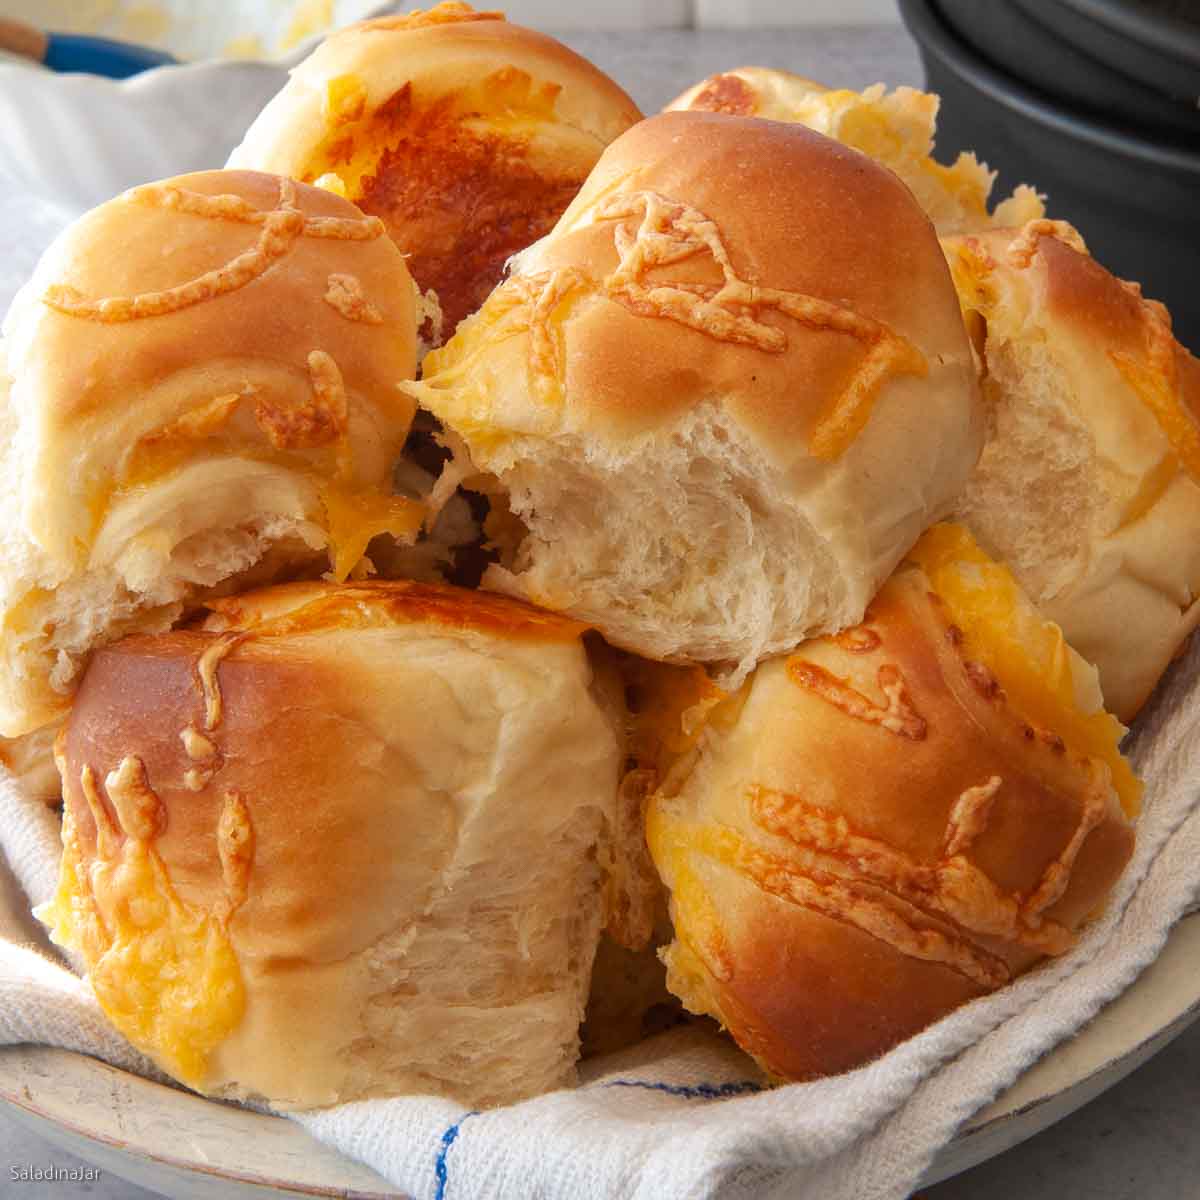 Cheddar Cheese Dinner rolls--still in the pan